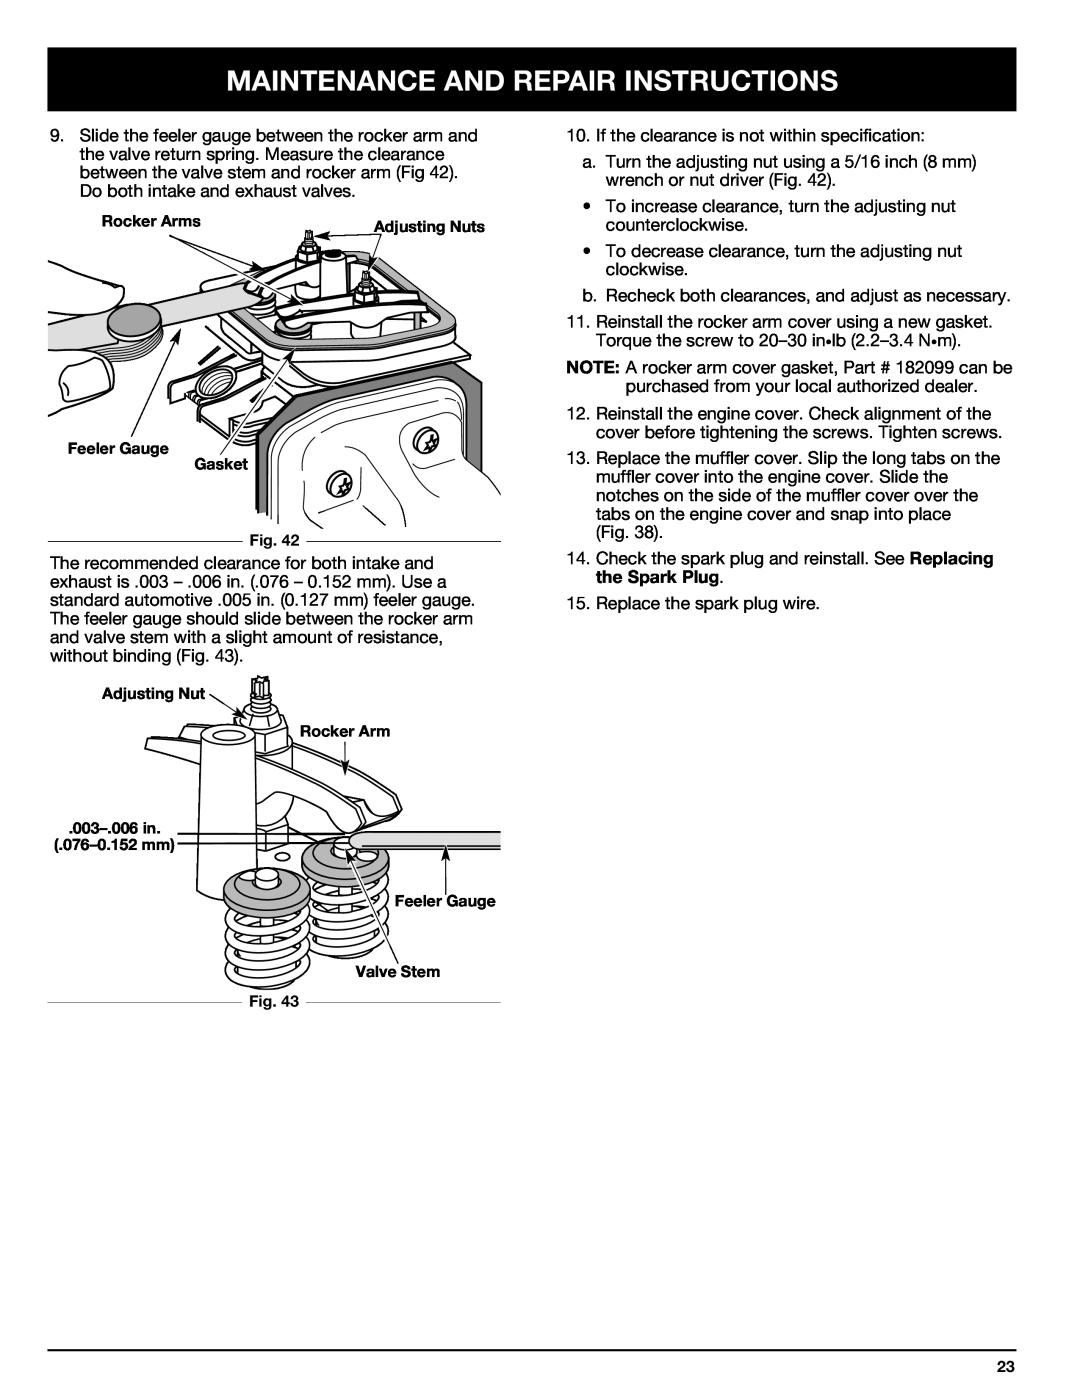 Ryobi Outdoor 875r manual Maintenance And Repair Instructions, If the clearance is not within specification 